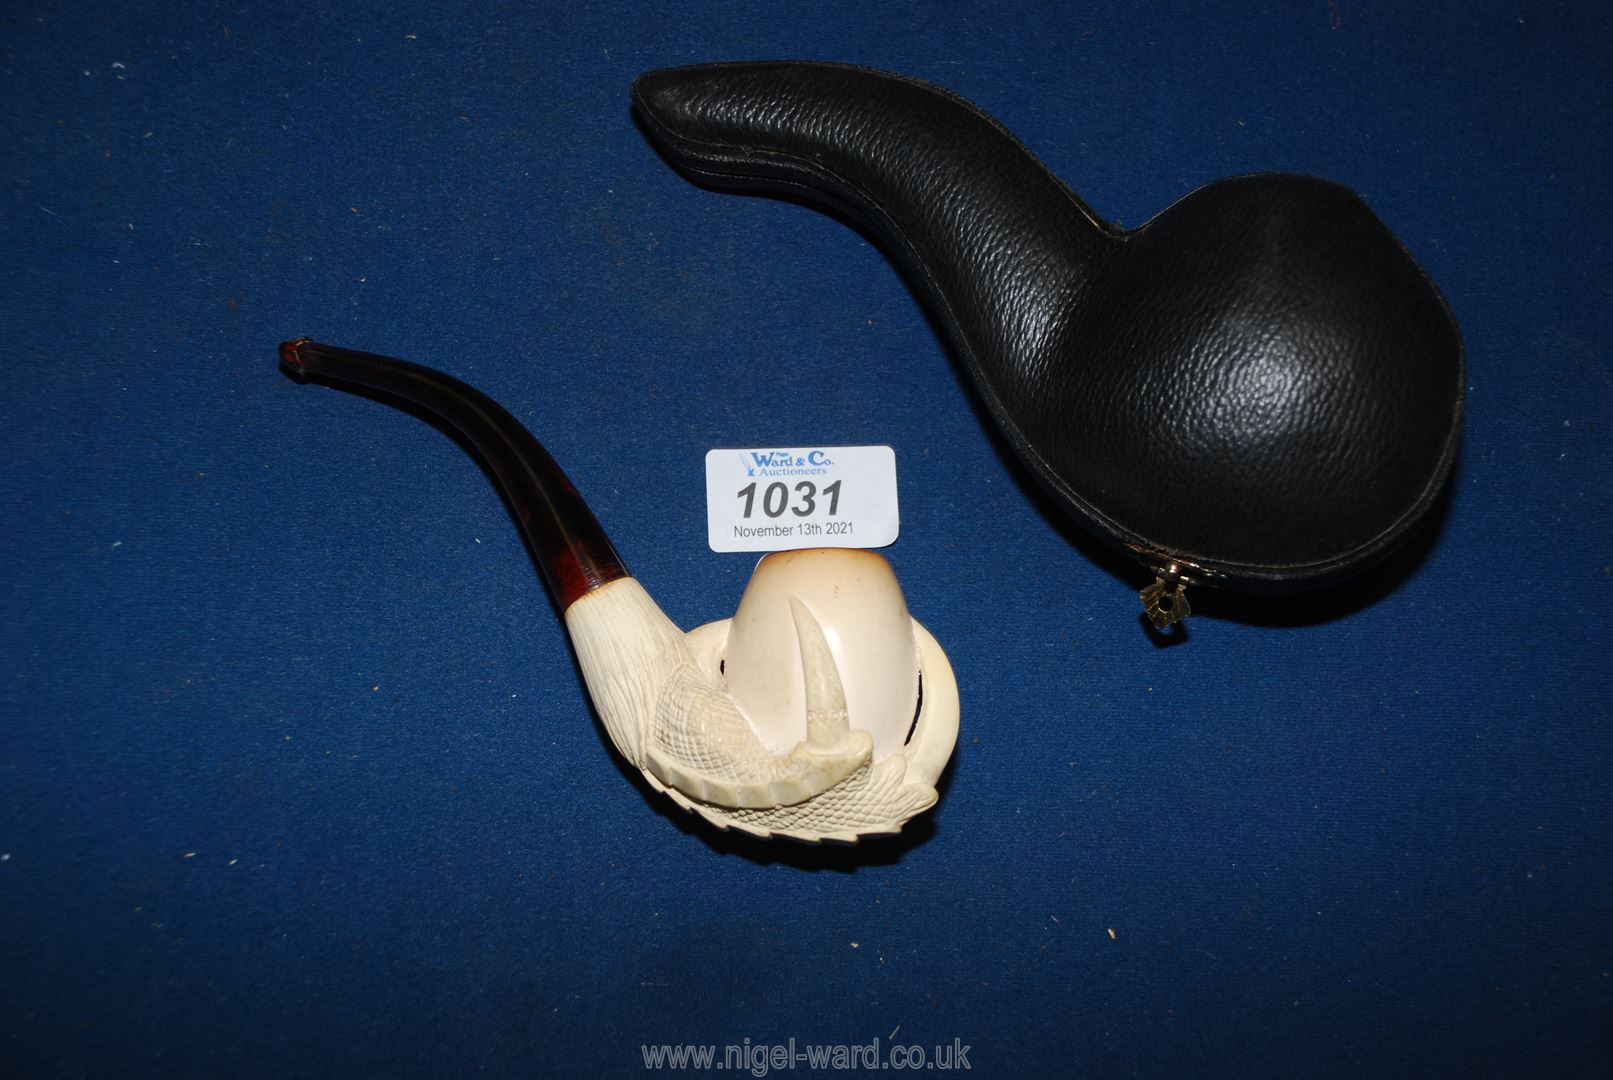 A lovely vintage Meerschaum pipe carved as an eagles claw holding an egg in its original case.